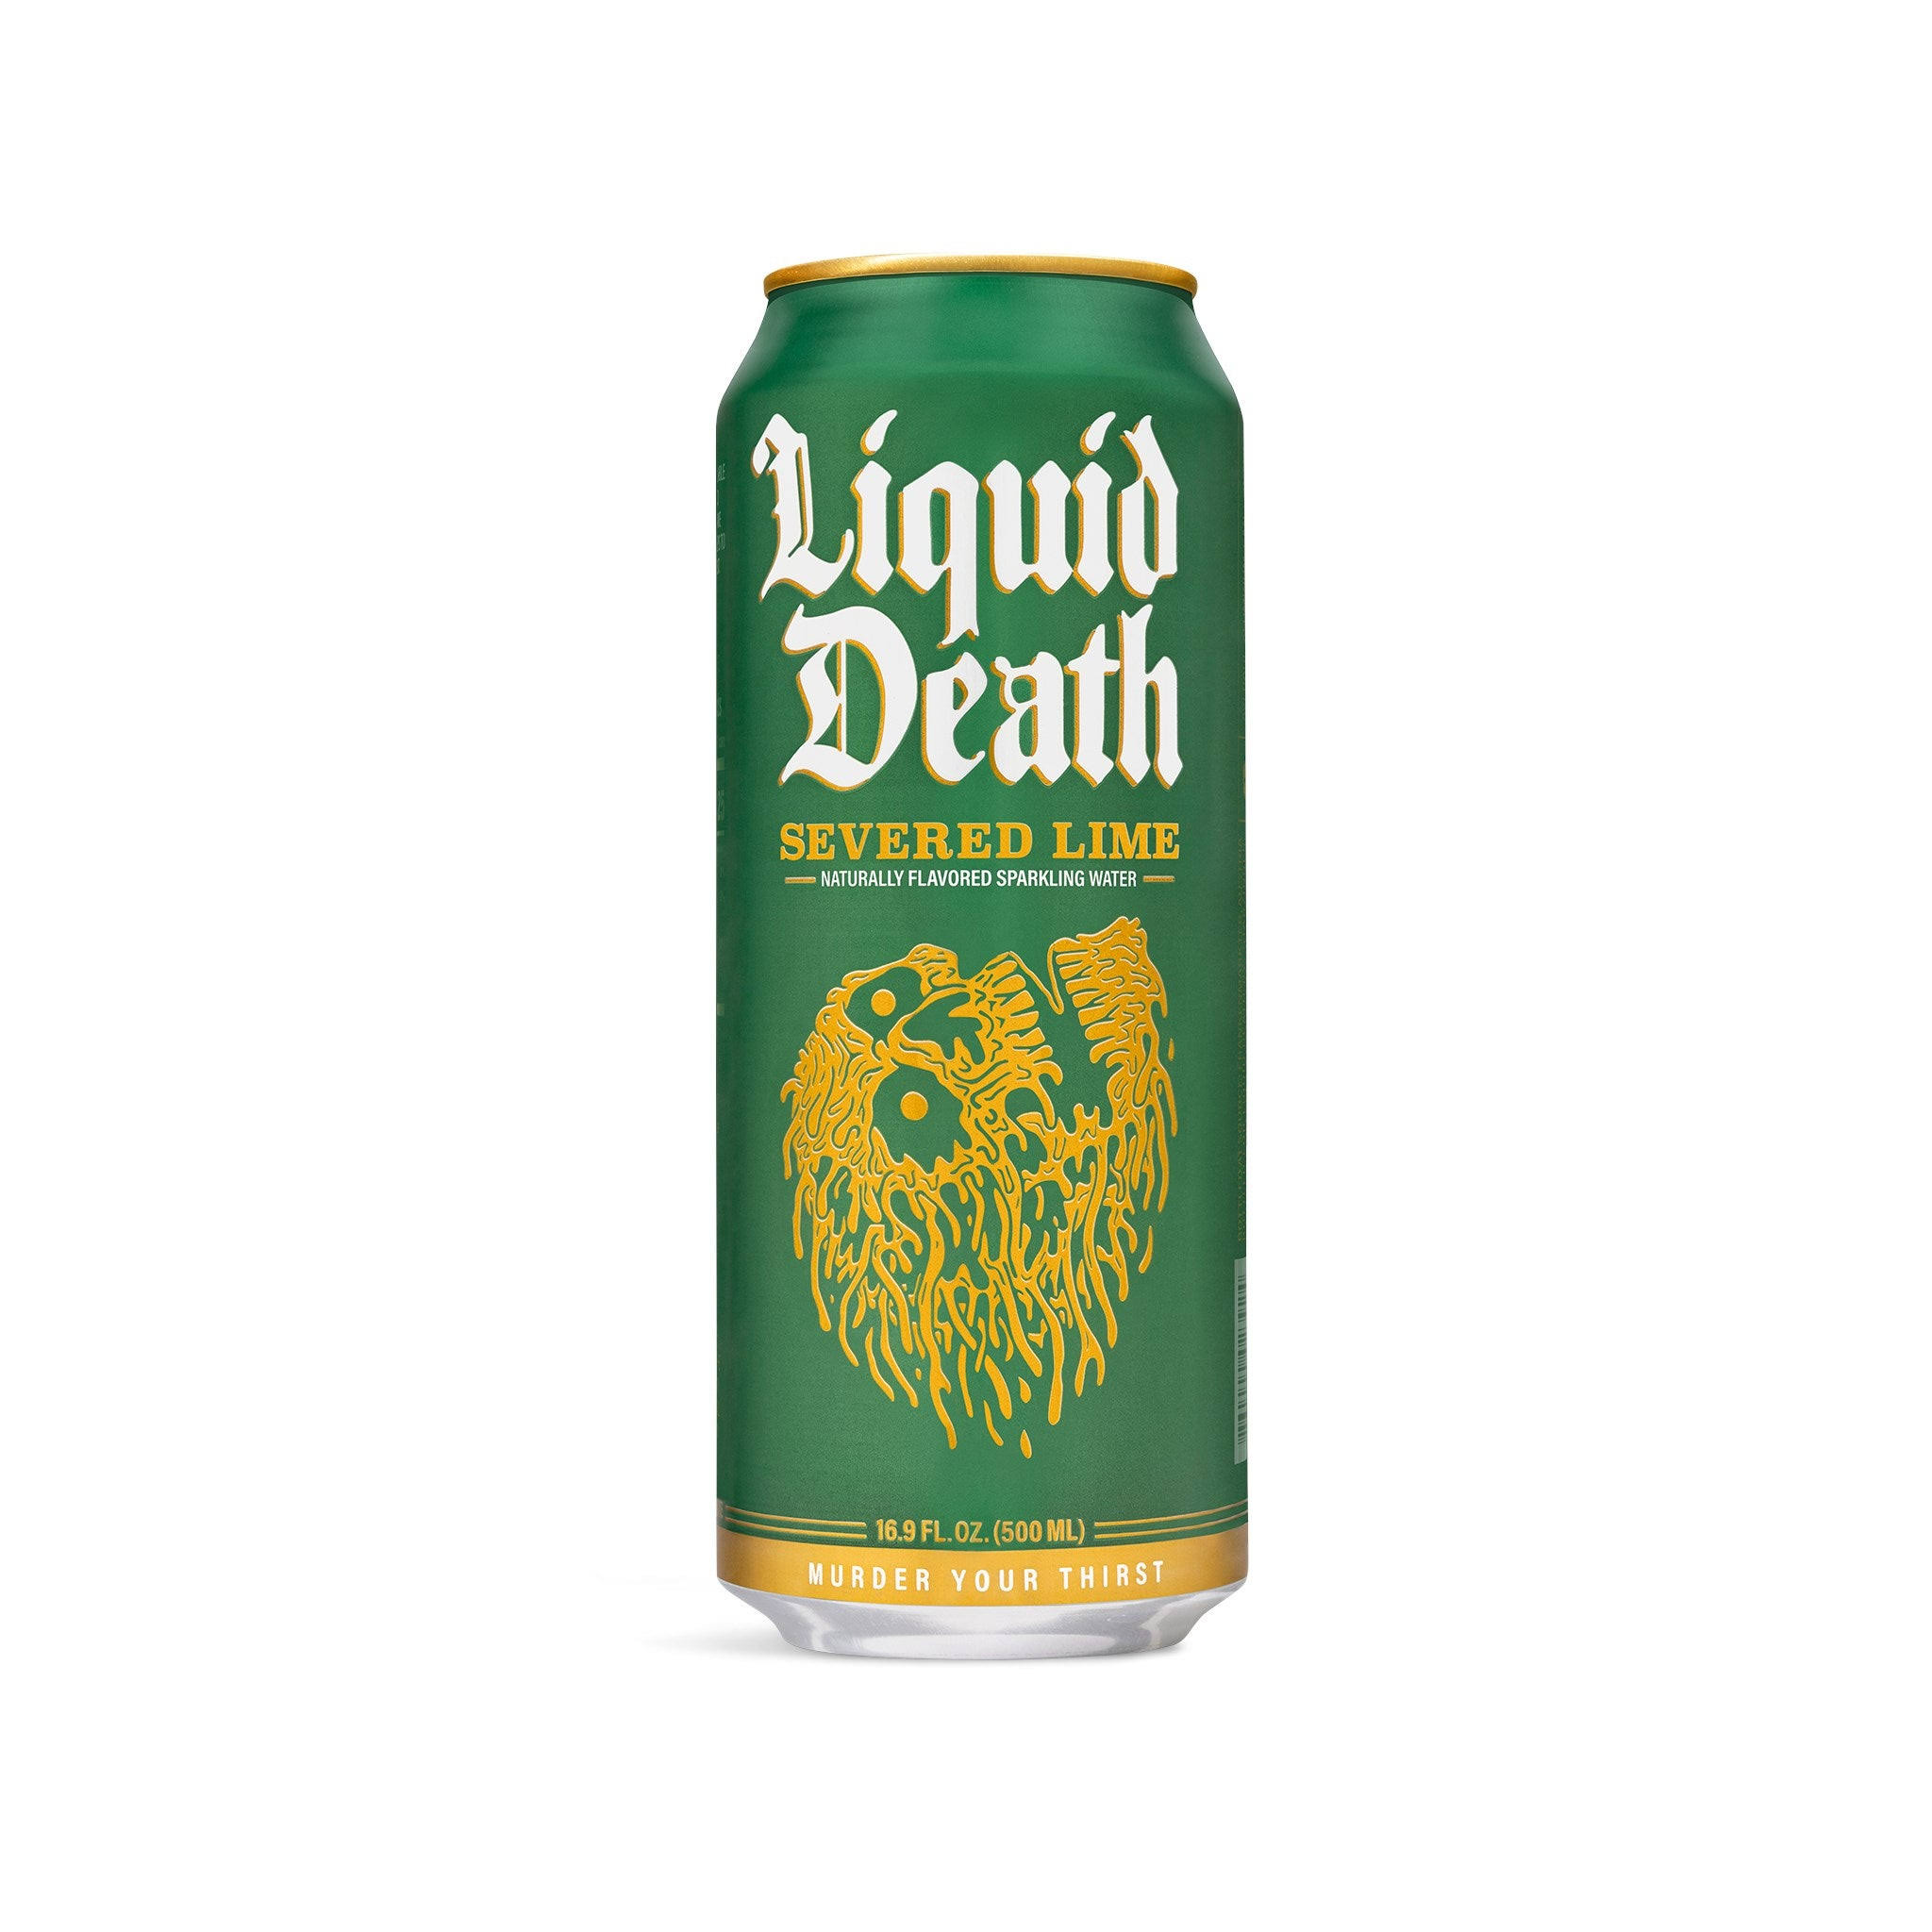 Liquid Death Sparkling Water, Severed Lime, 16.9 FZ